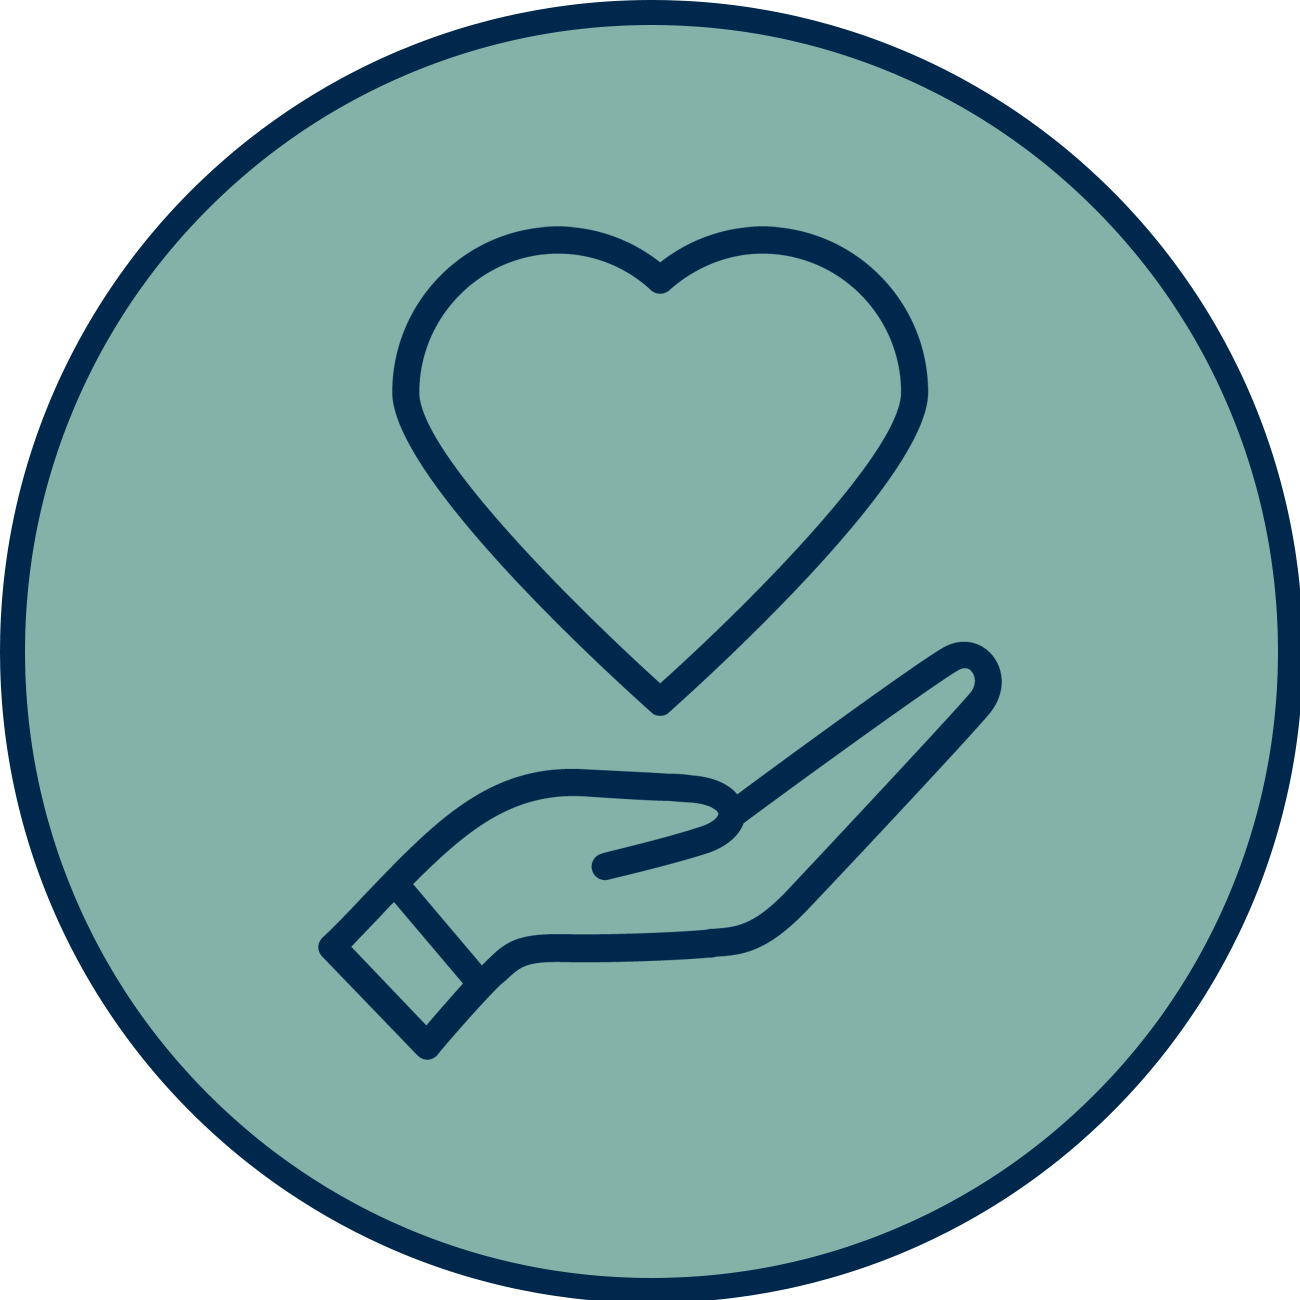 Icon of hand and heart. philanthropy by Justin Blake from the Noun Project